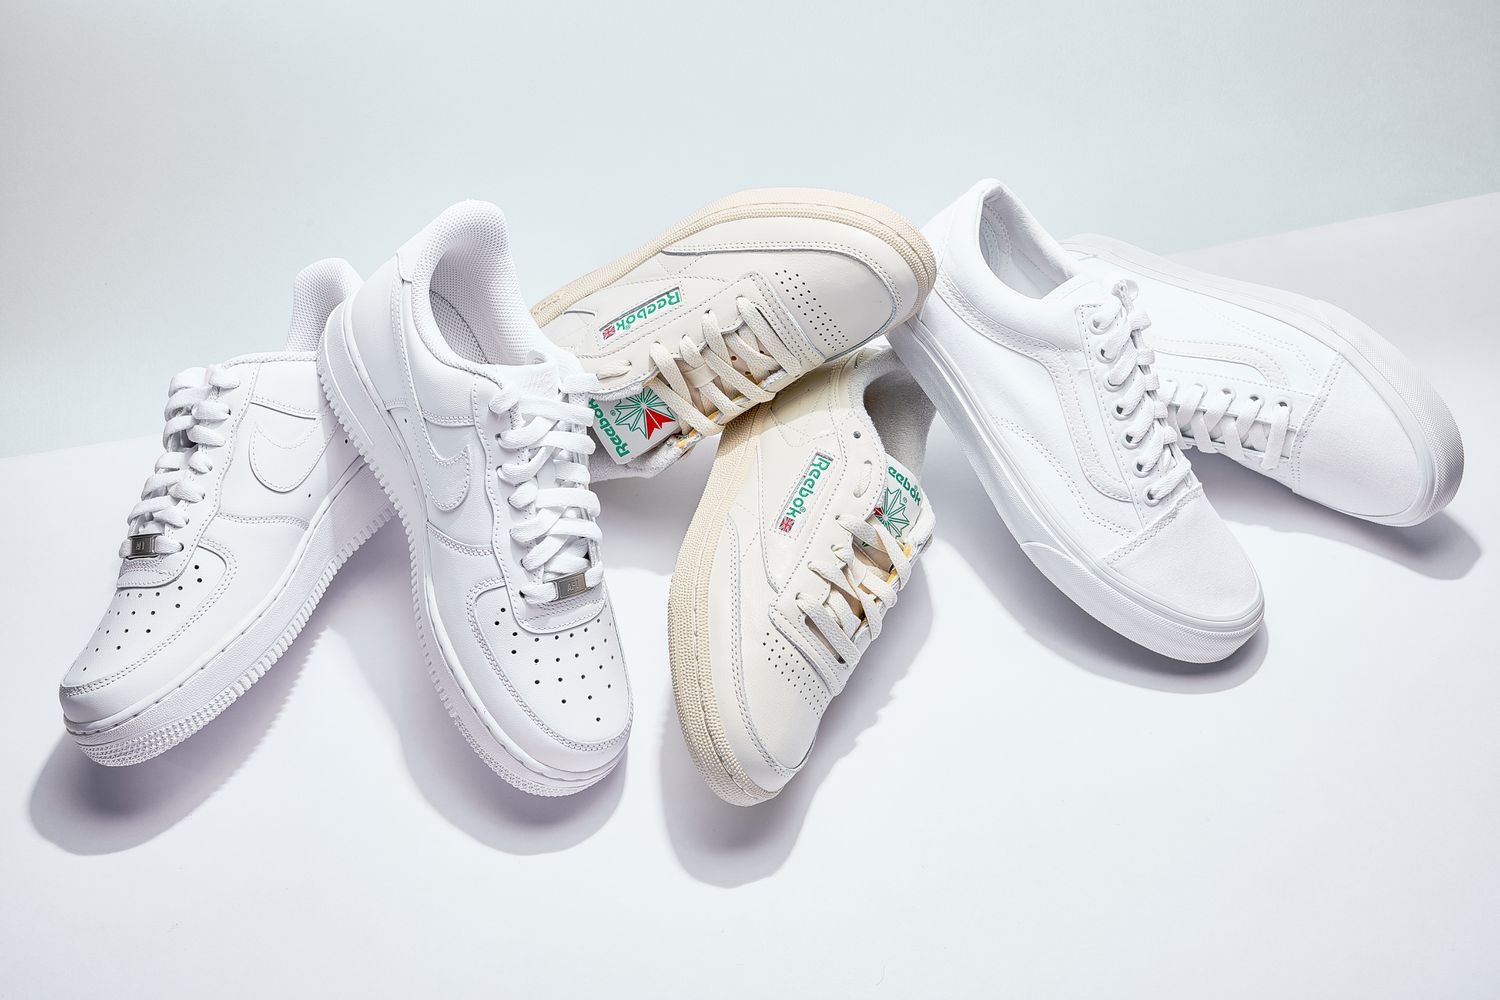 Assortment of the best white sneakers we recommend on a white background